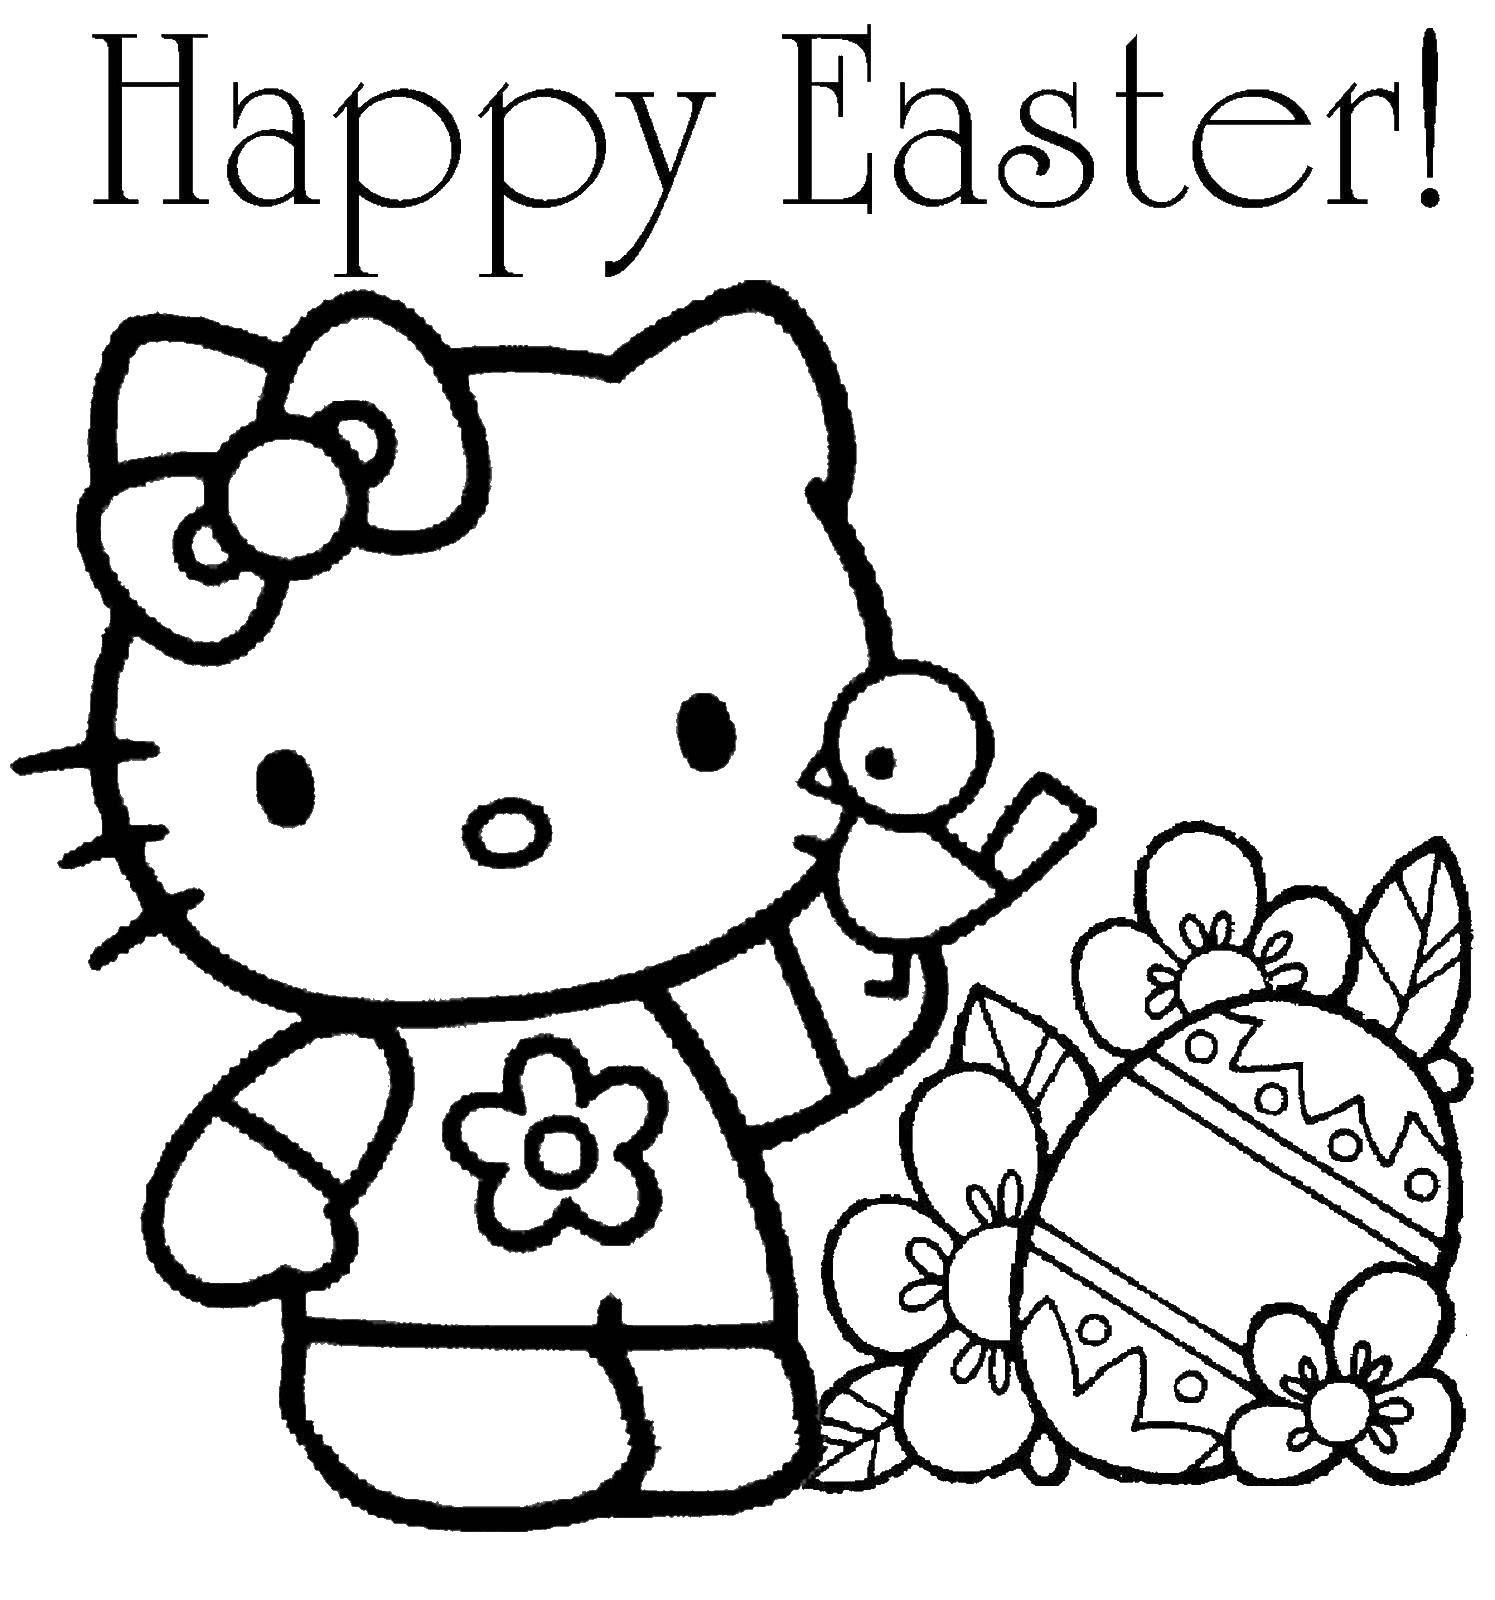 Coloring Hello kitty and Easter egg. Category Hello Kitty. Tags:  Hello kitty, Easter eggs.